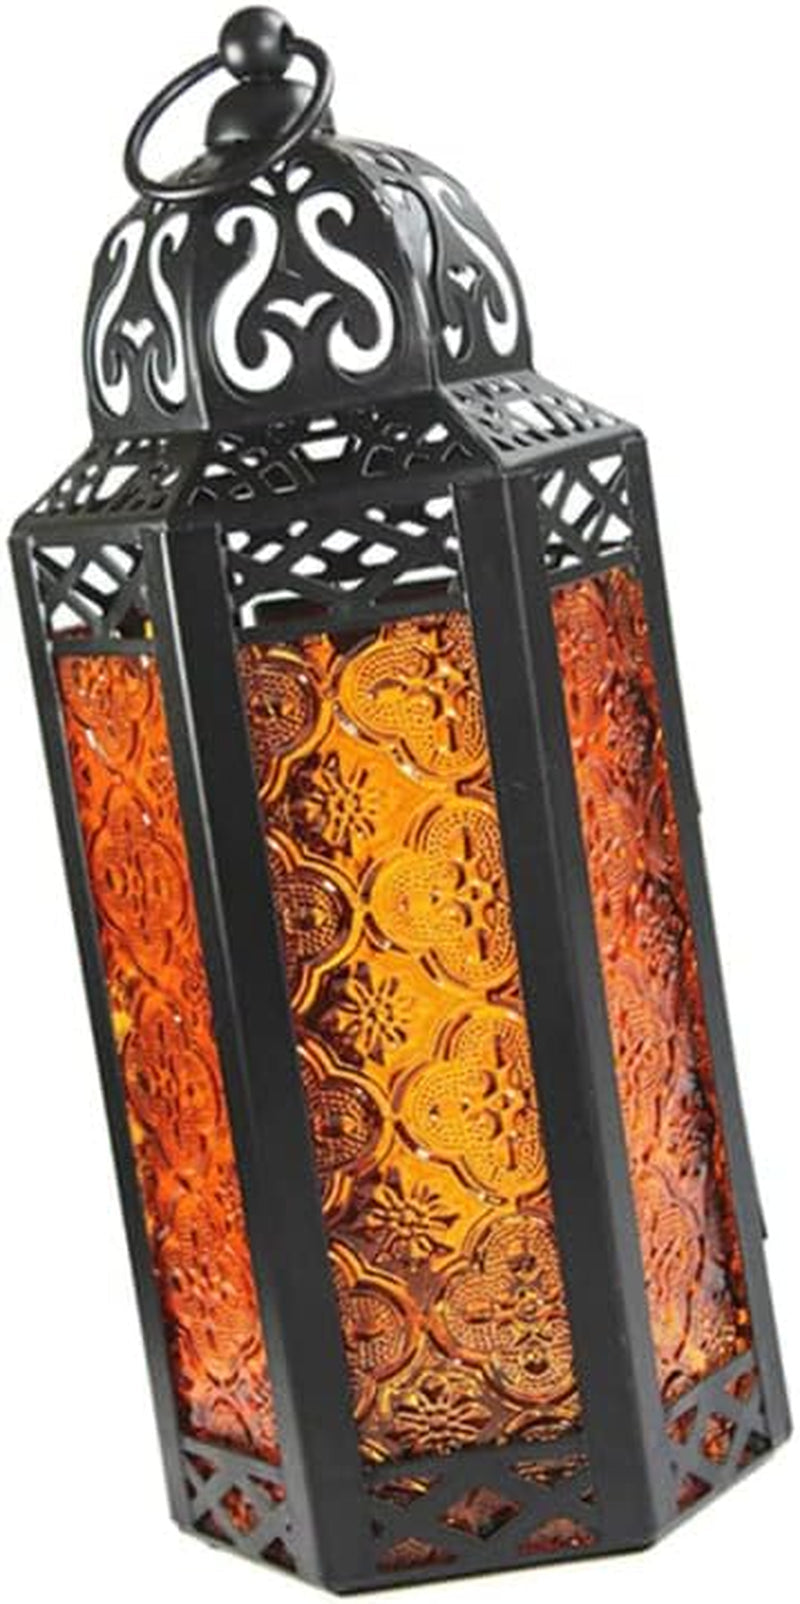 11.5" Moroccan Style Candle Lantern, Black Metal Frame, Orange Colored Glass Panels Great for Patio, Indoors/Outdoors, Events, Parties and Weddings (Orange)